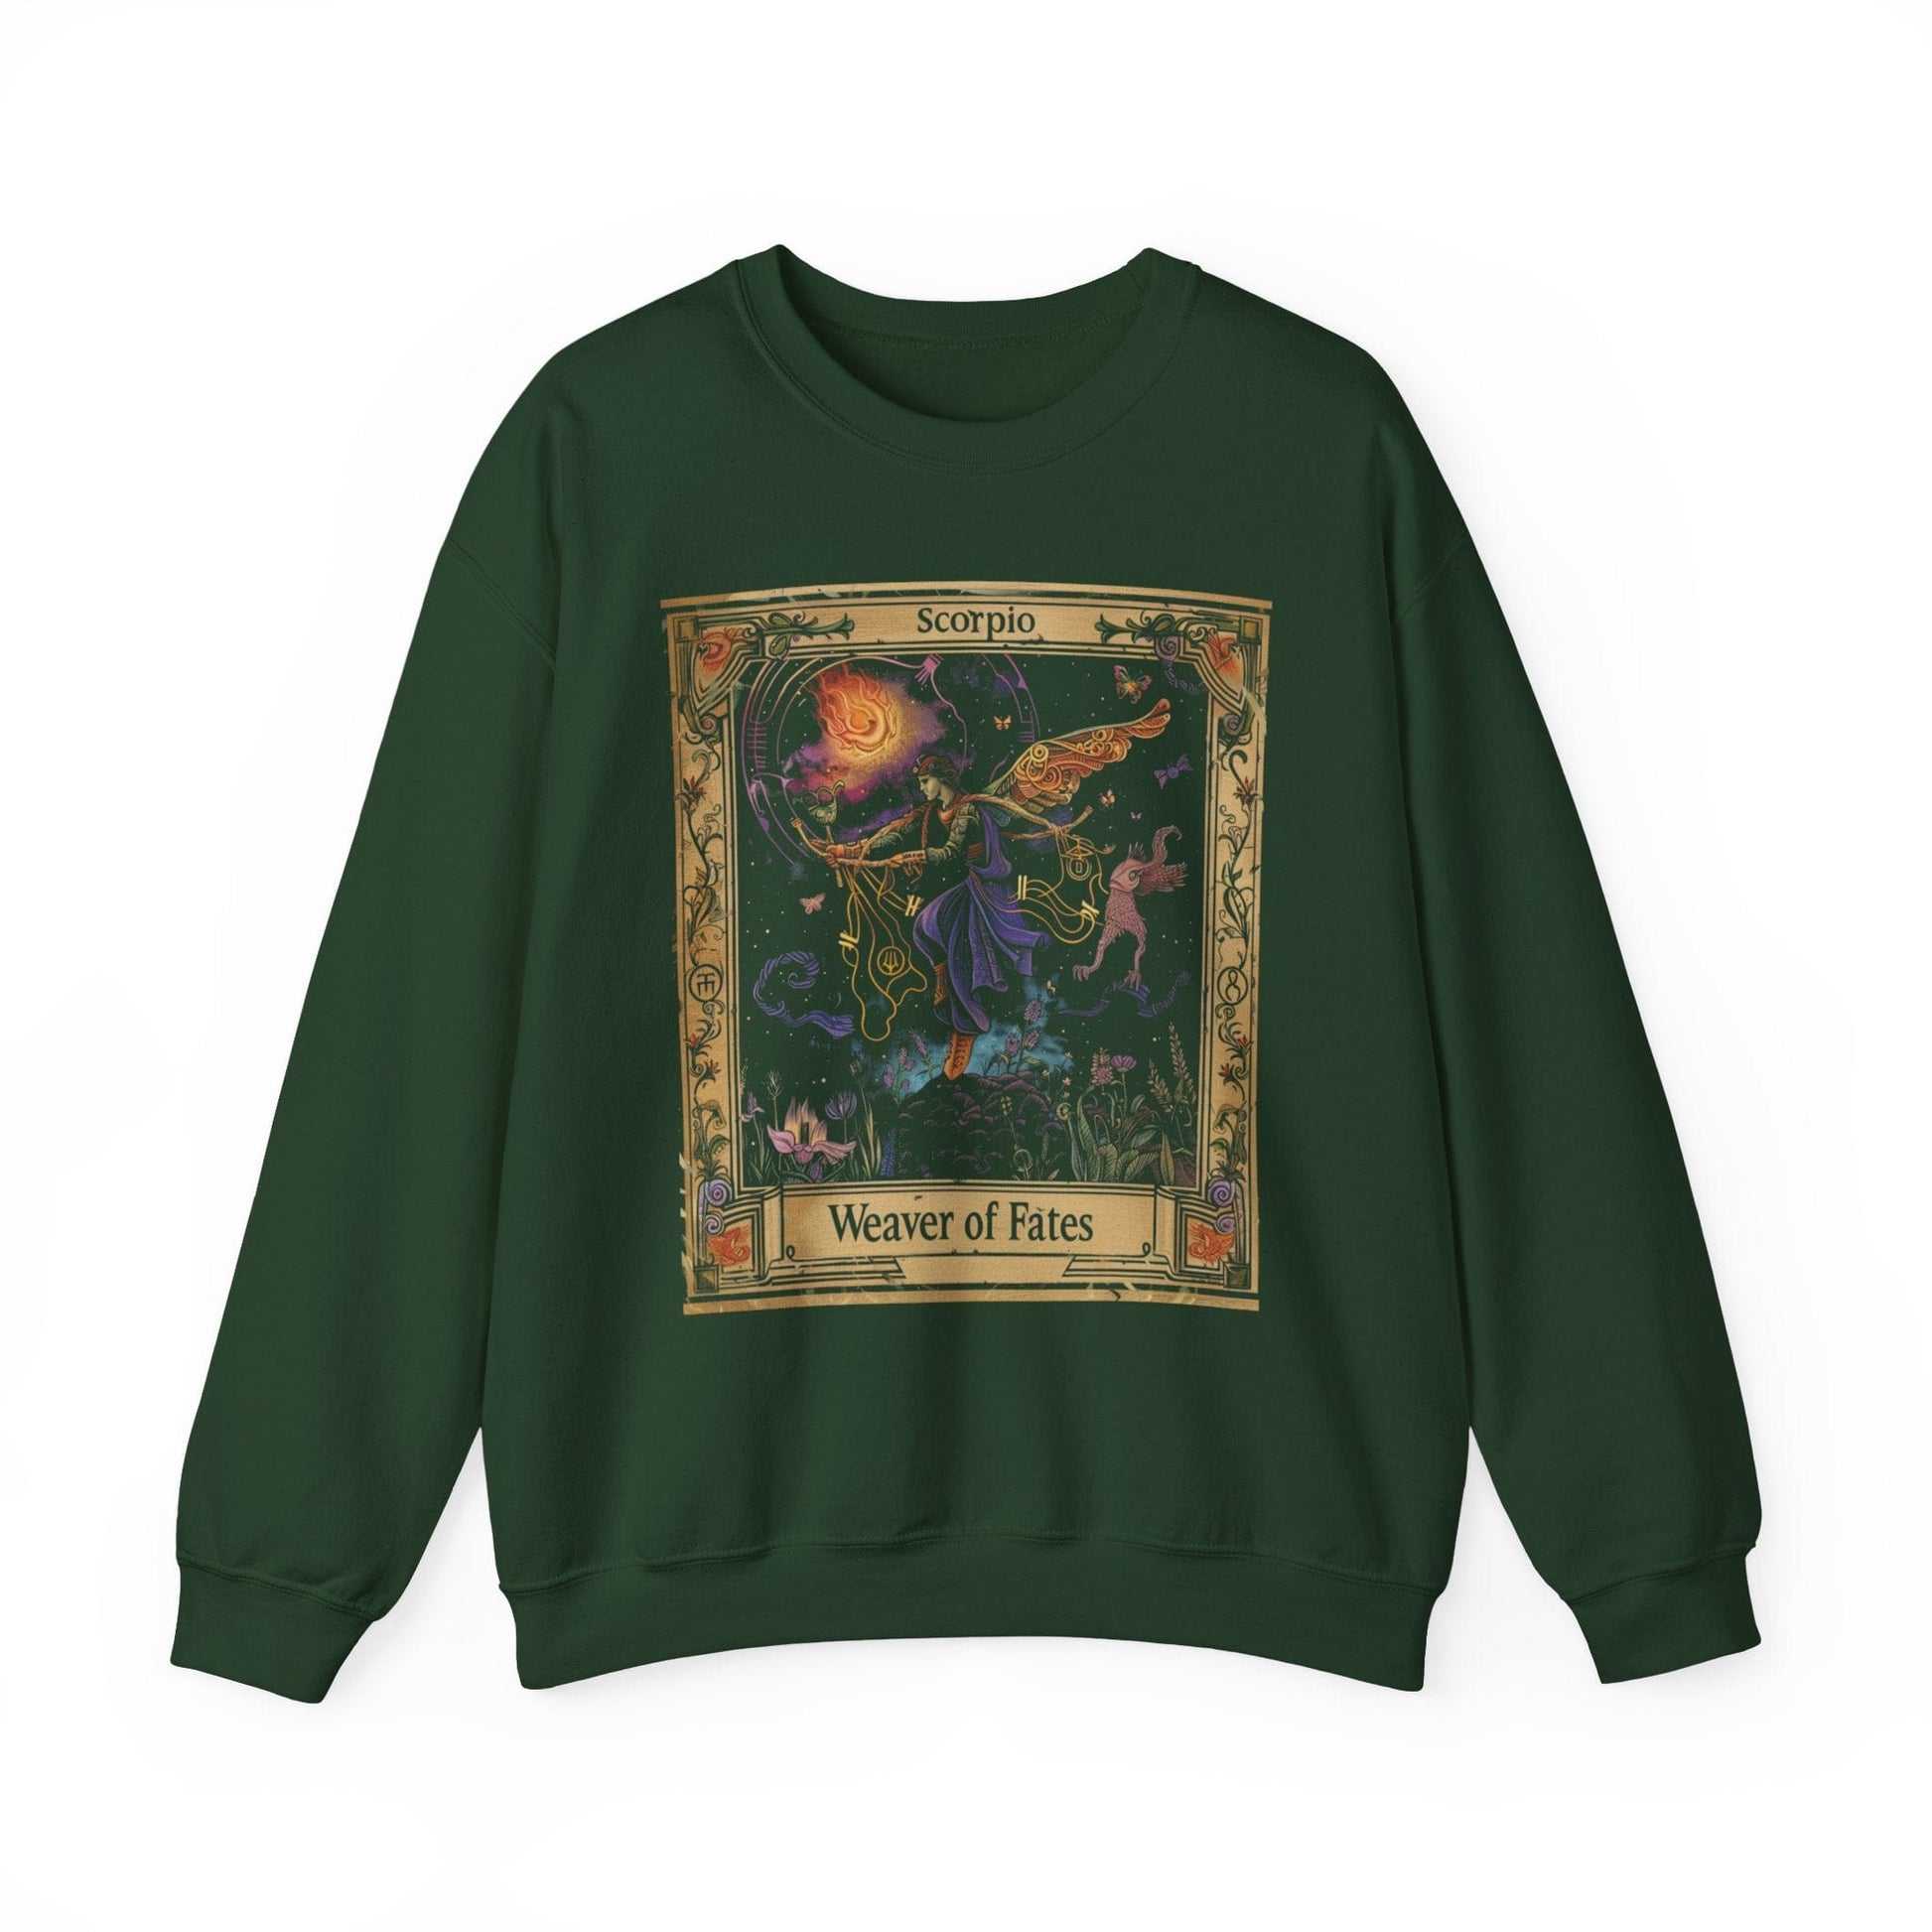 Sweatshirt S / Forest Green Scorpio The Weaver of Fates Extra Soft Sweater